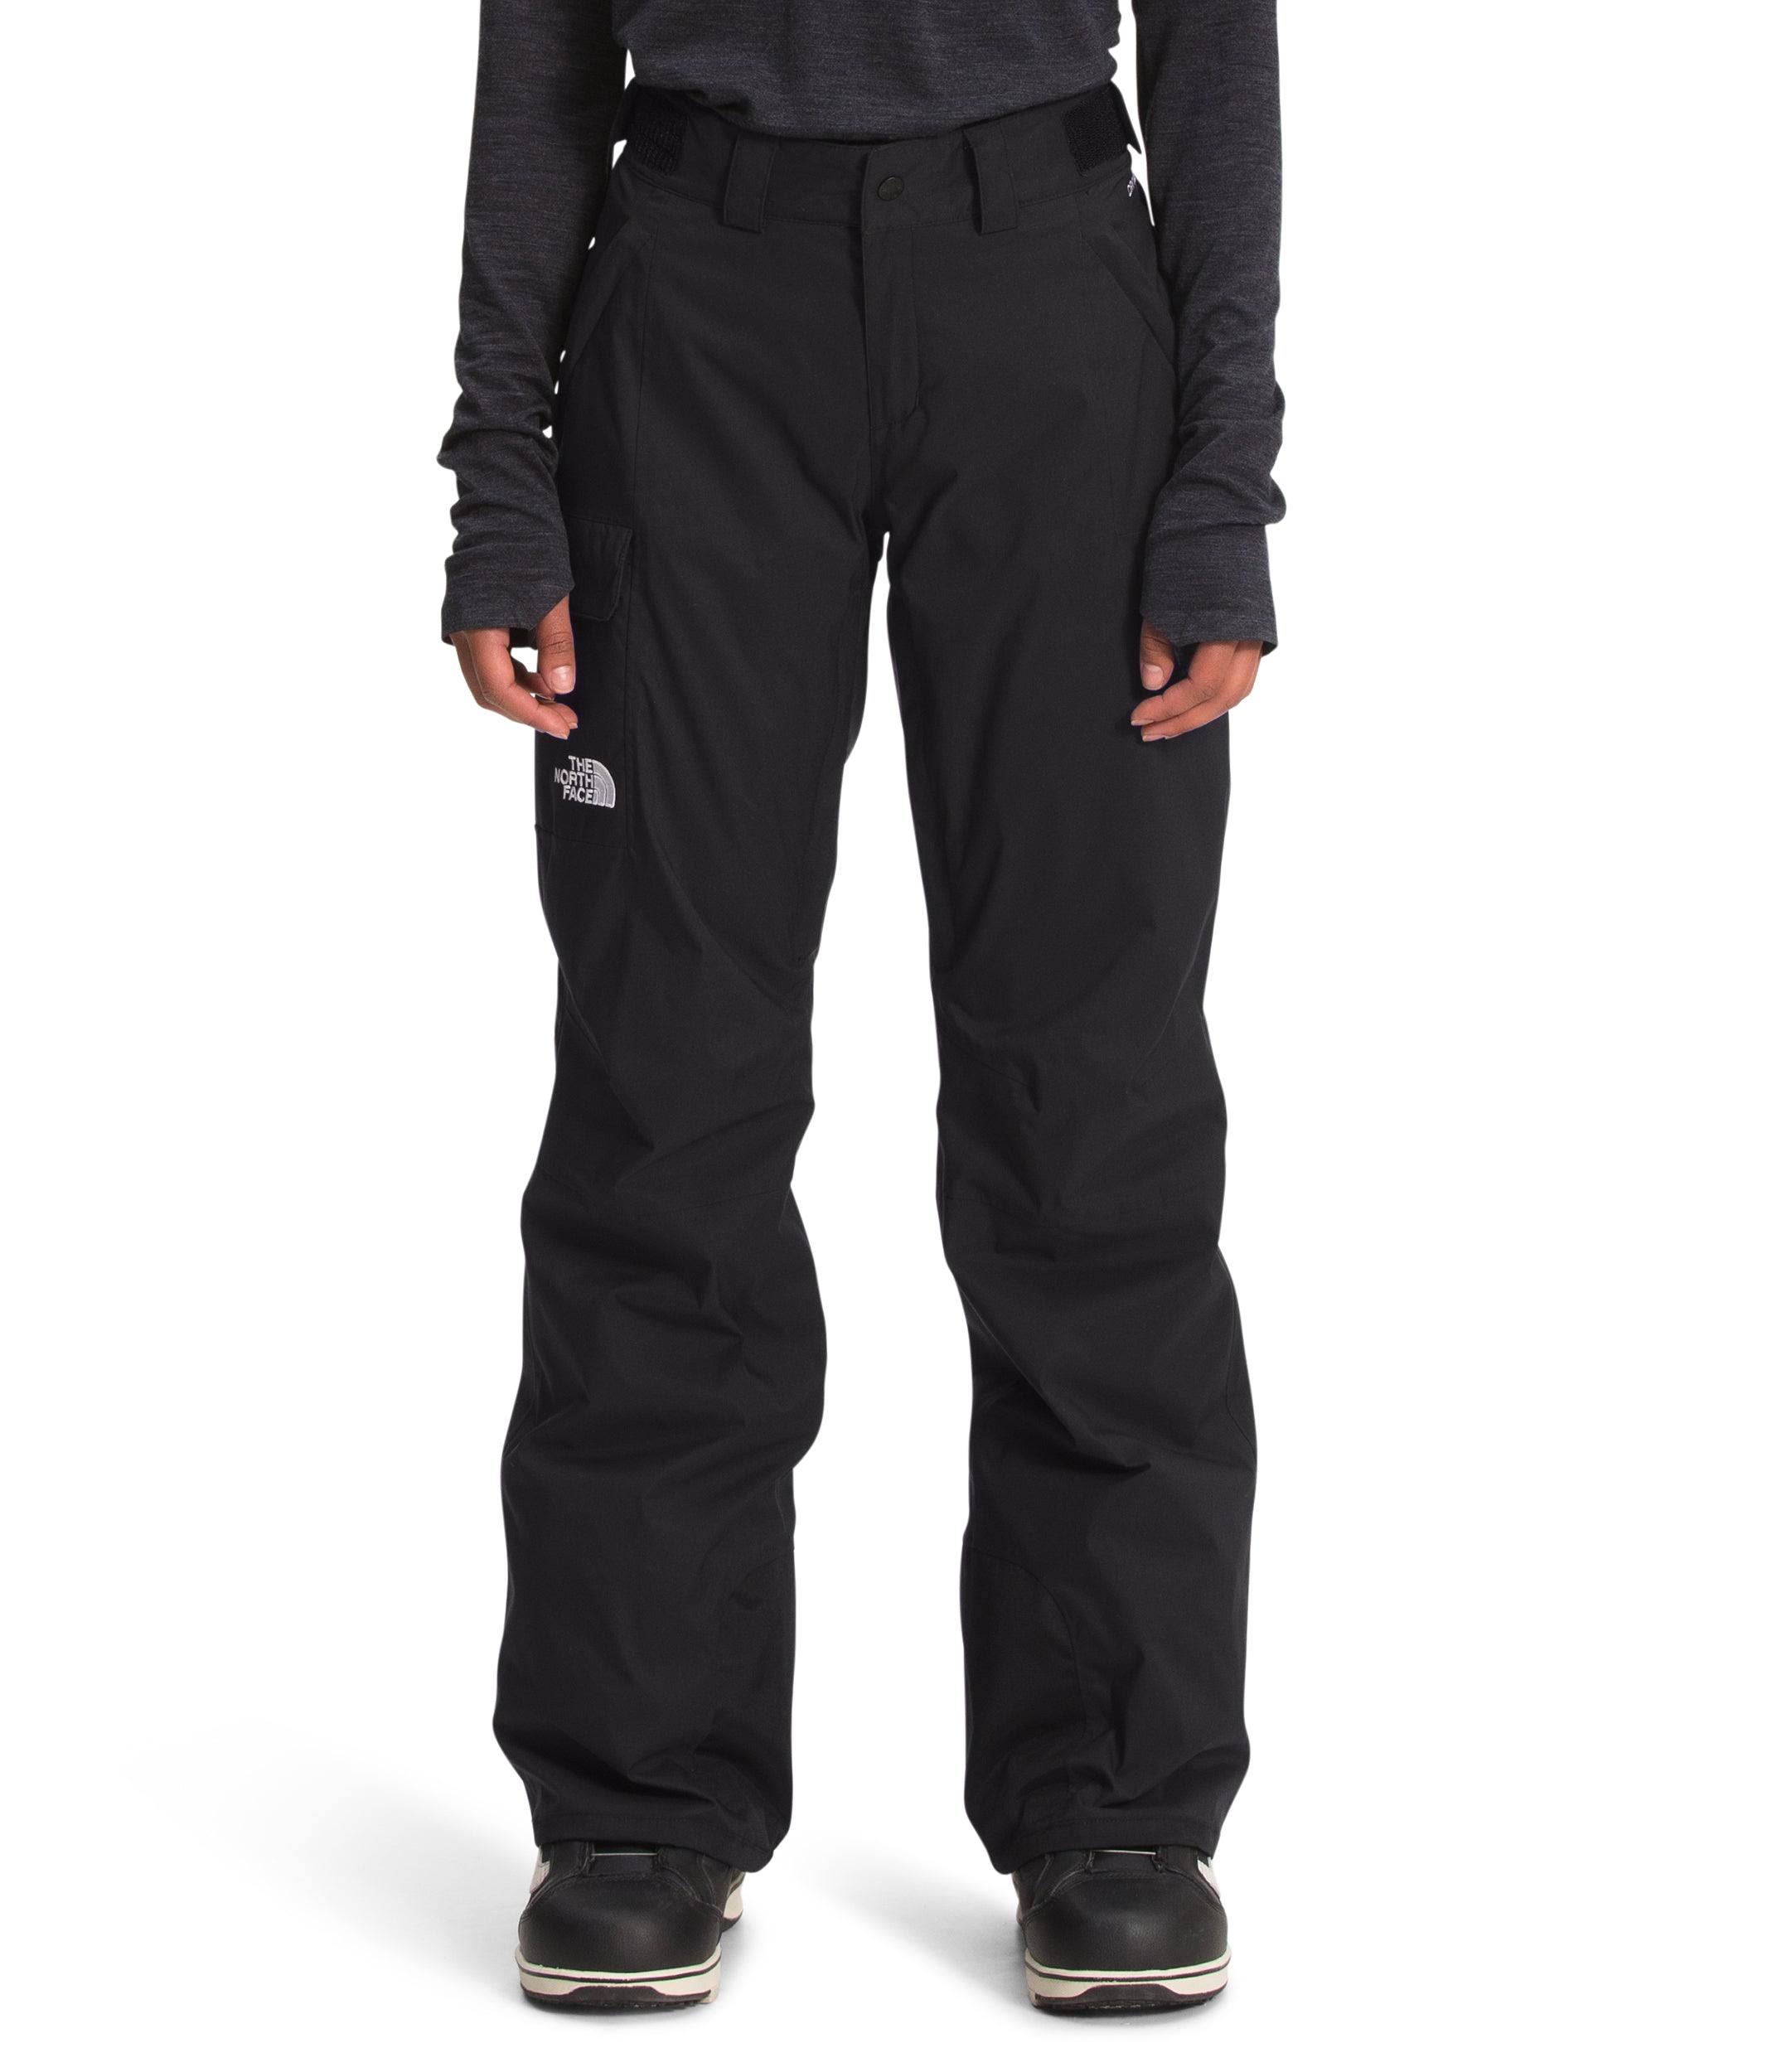 The North Face Women's Freedom Insulated Regular Pants